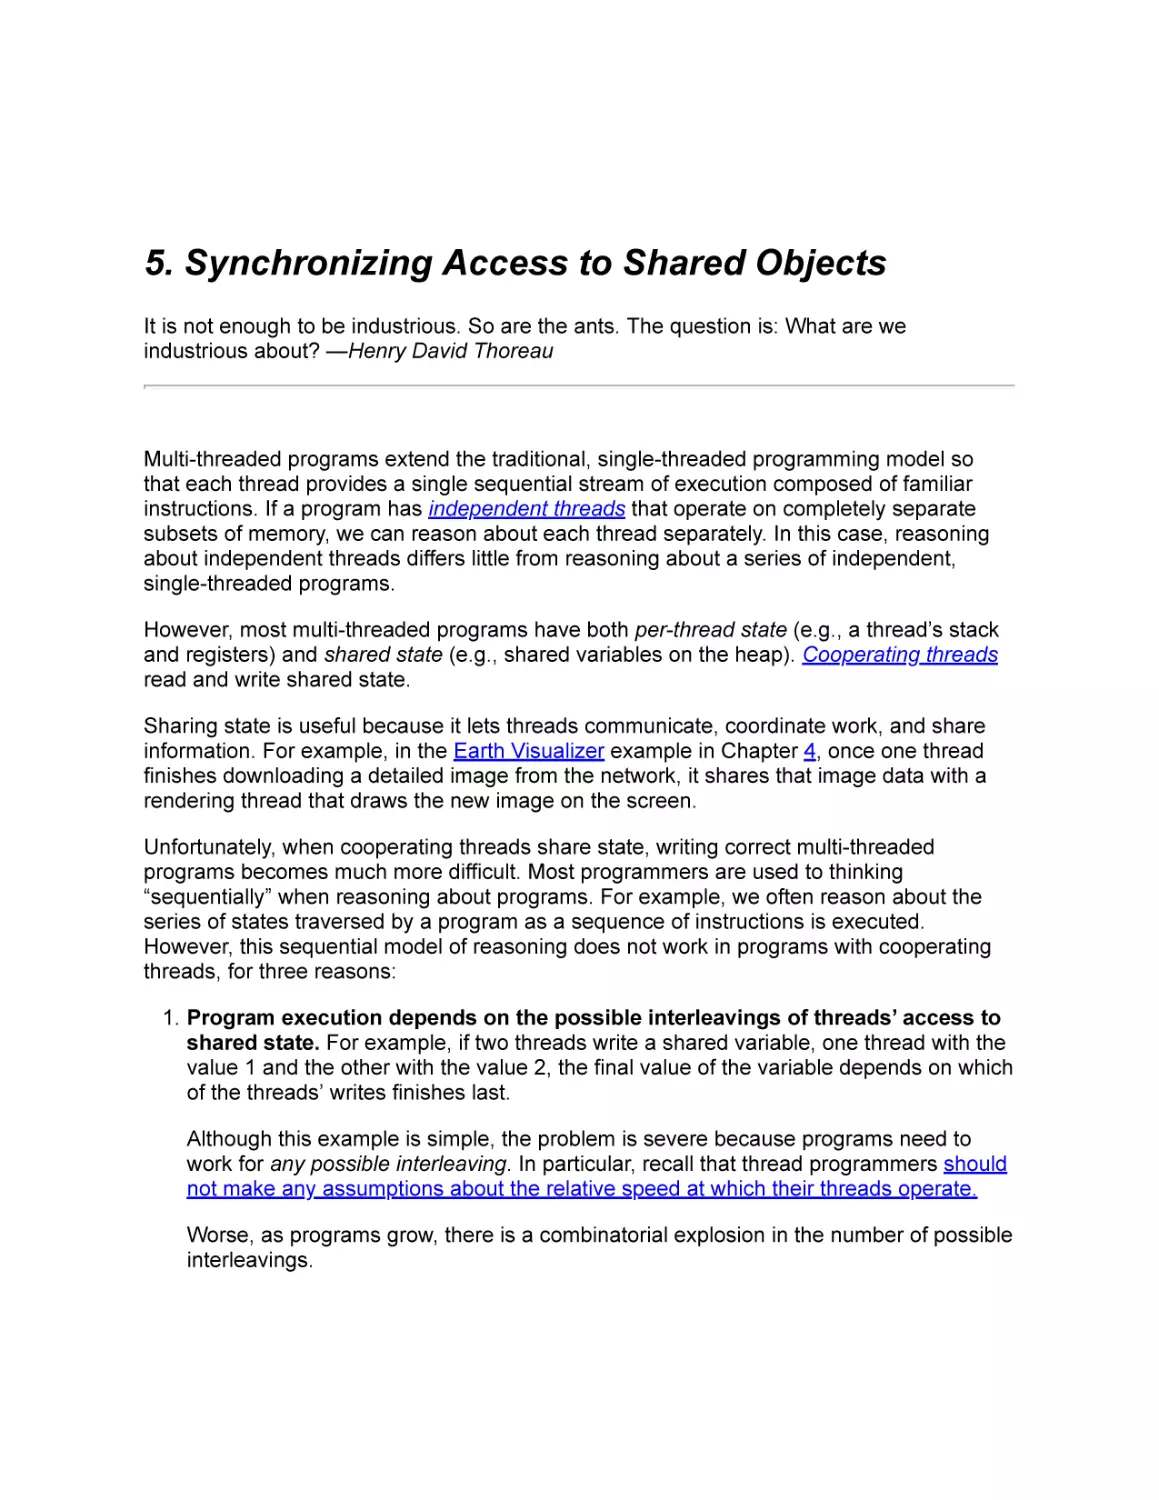 5 Synchronizing Access to Shared Objects